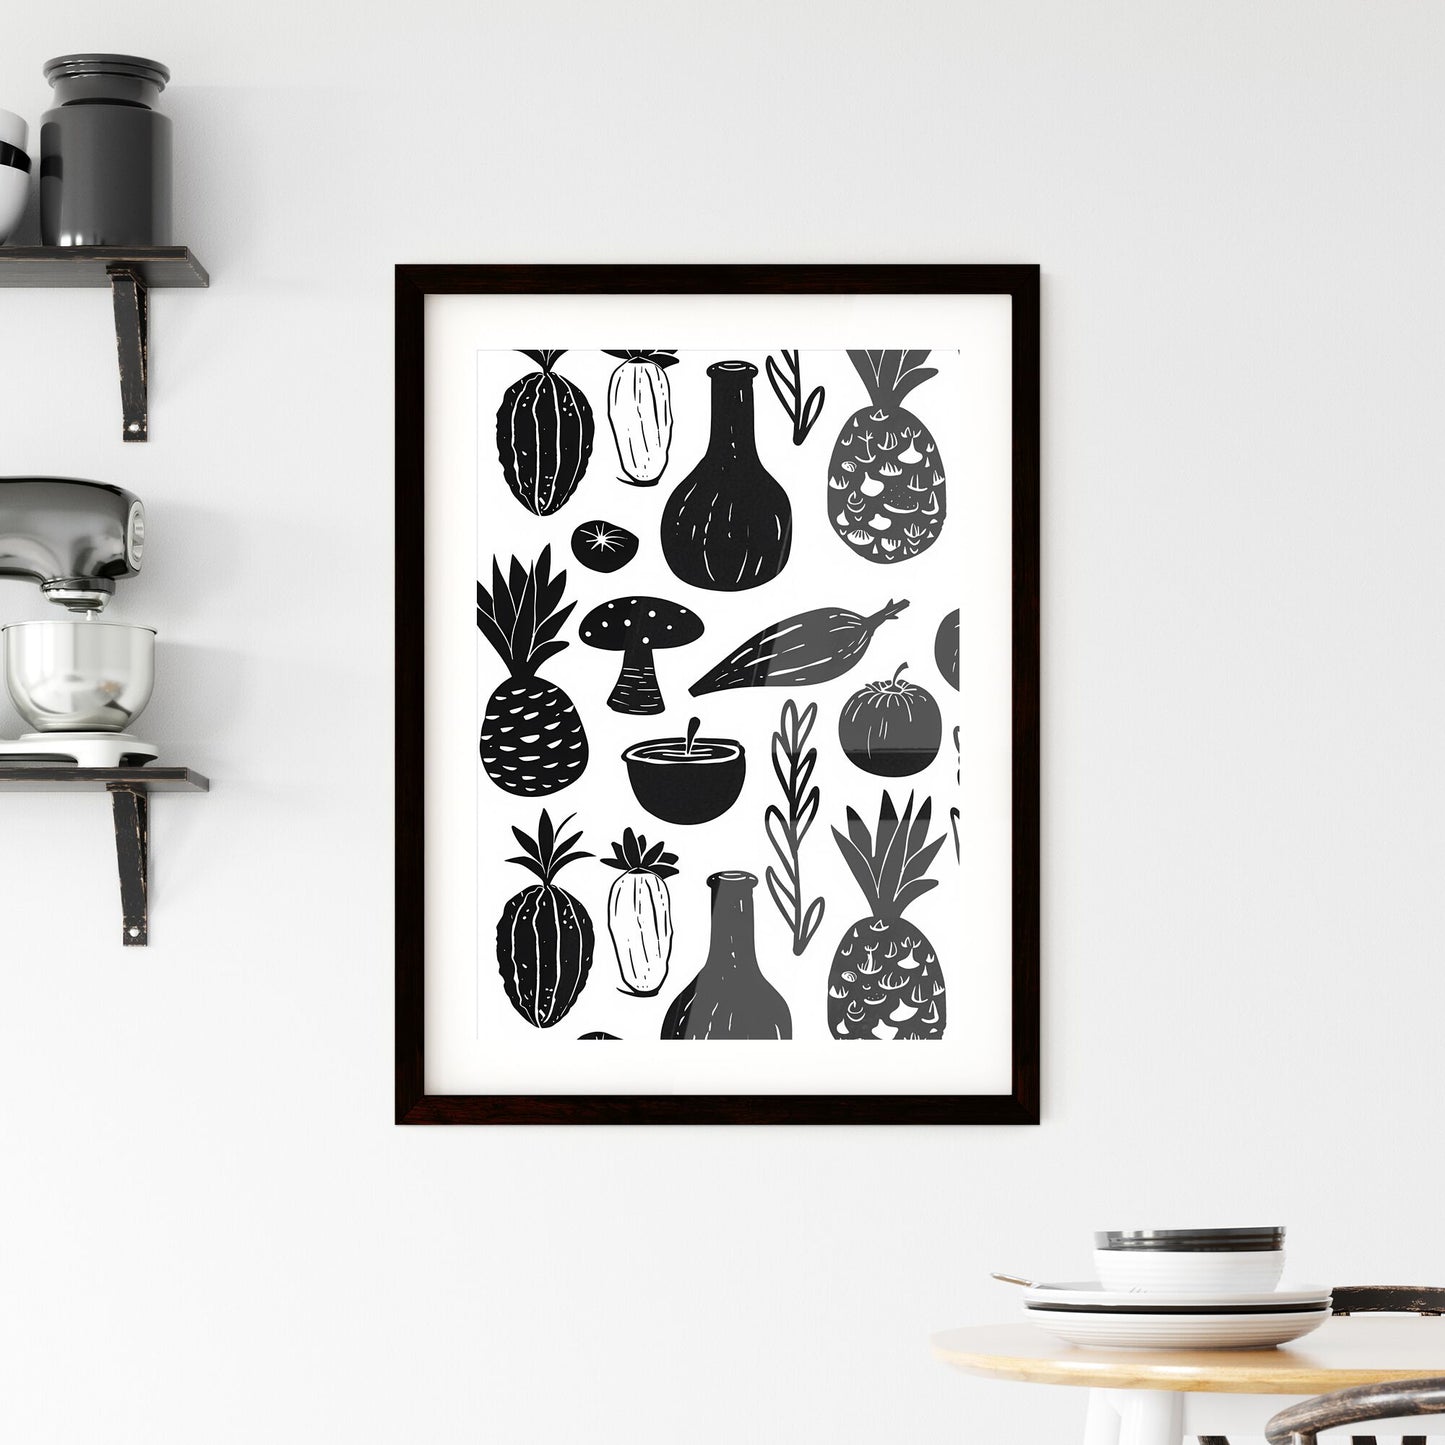 Handcrafted Black and White Fruits Doodle Pattern: Modern Art Design with Vibrant Flair Default Title